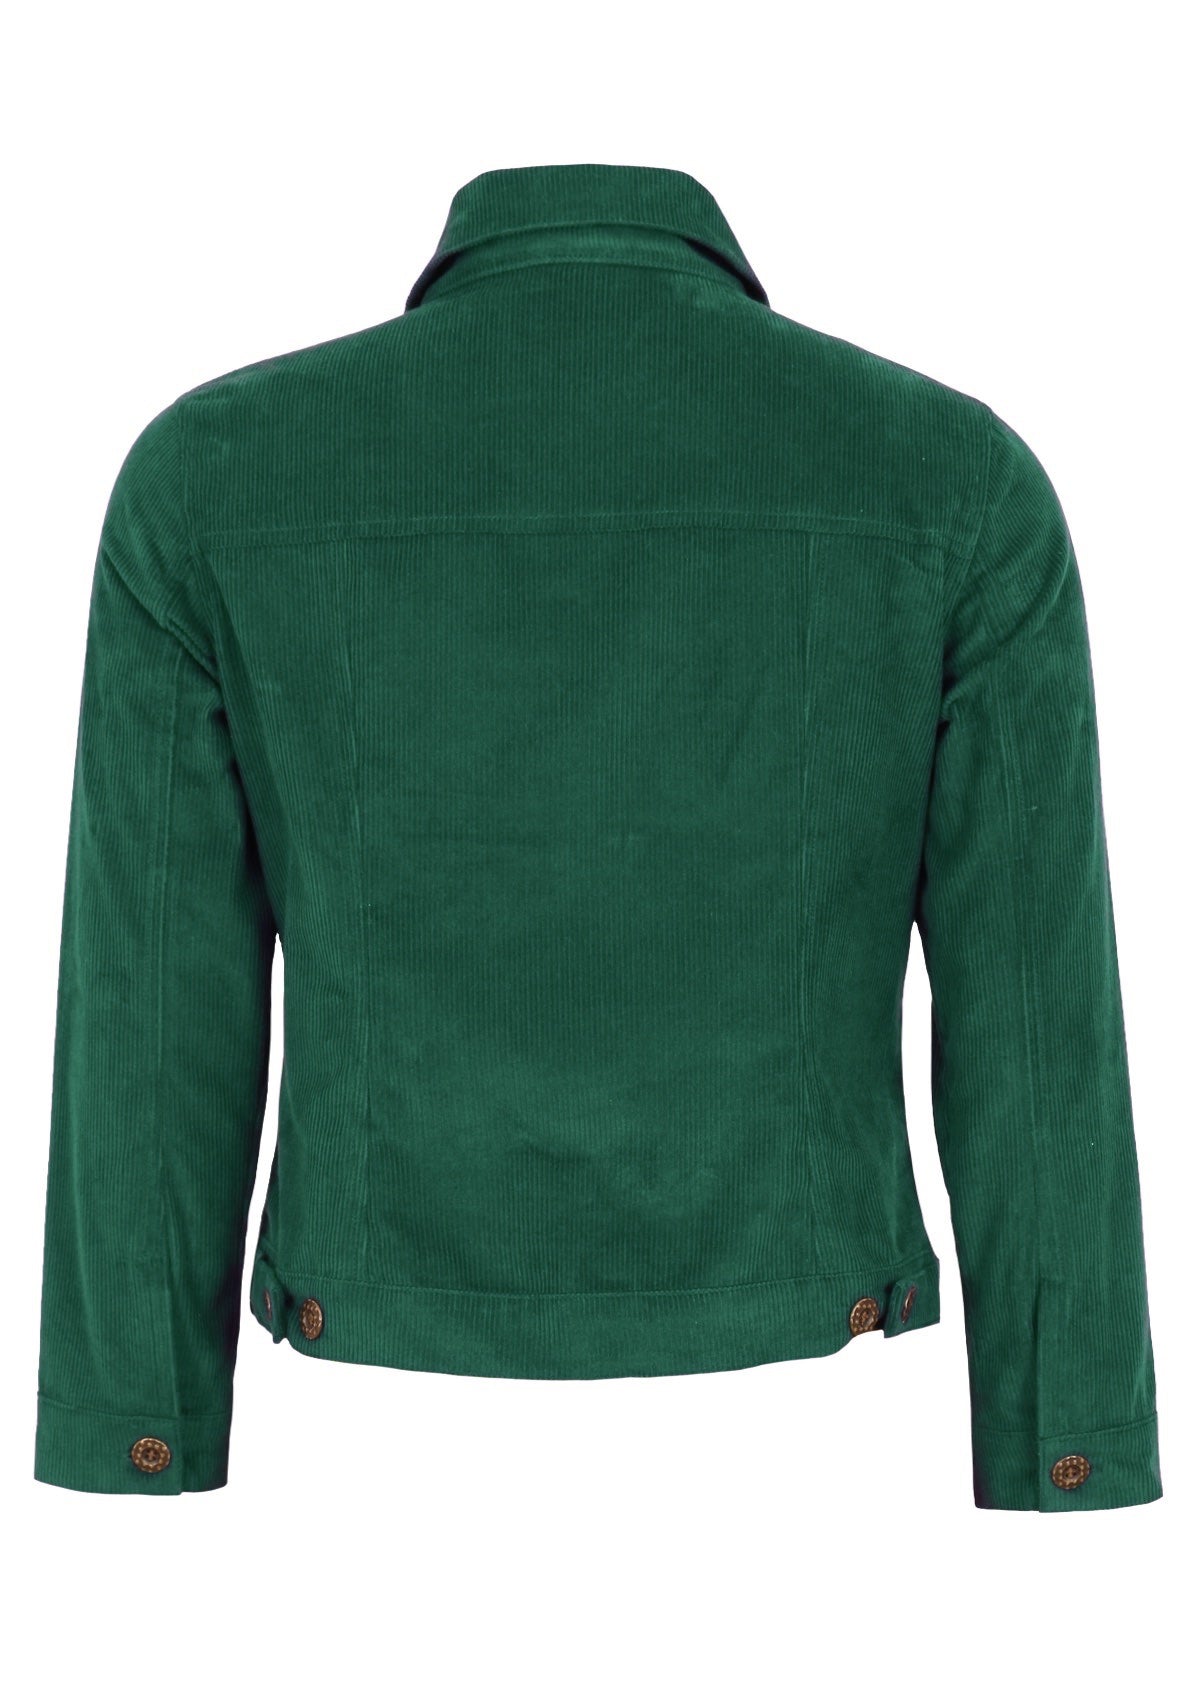 100% cotton corduroy jacket in green has adjustable tabs for the perfect fit!